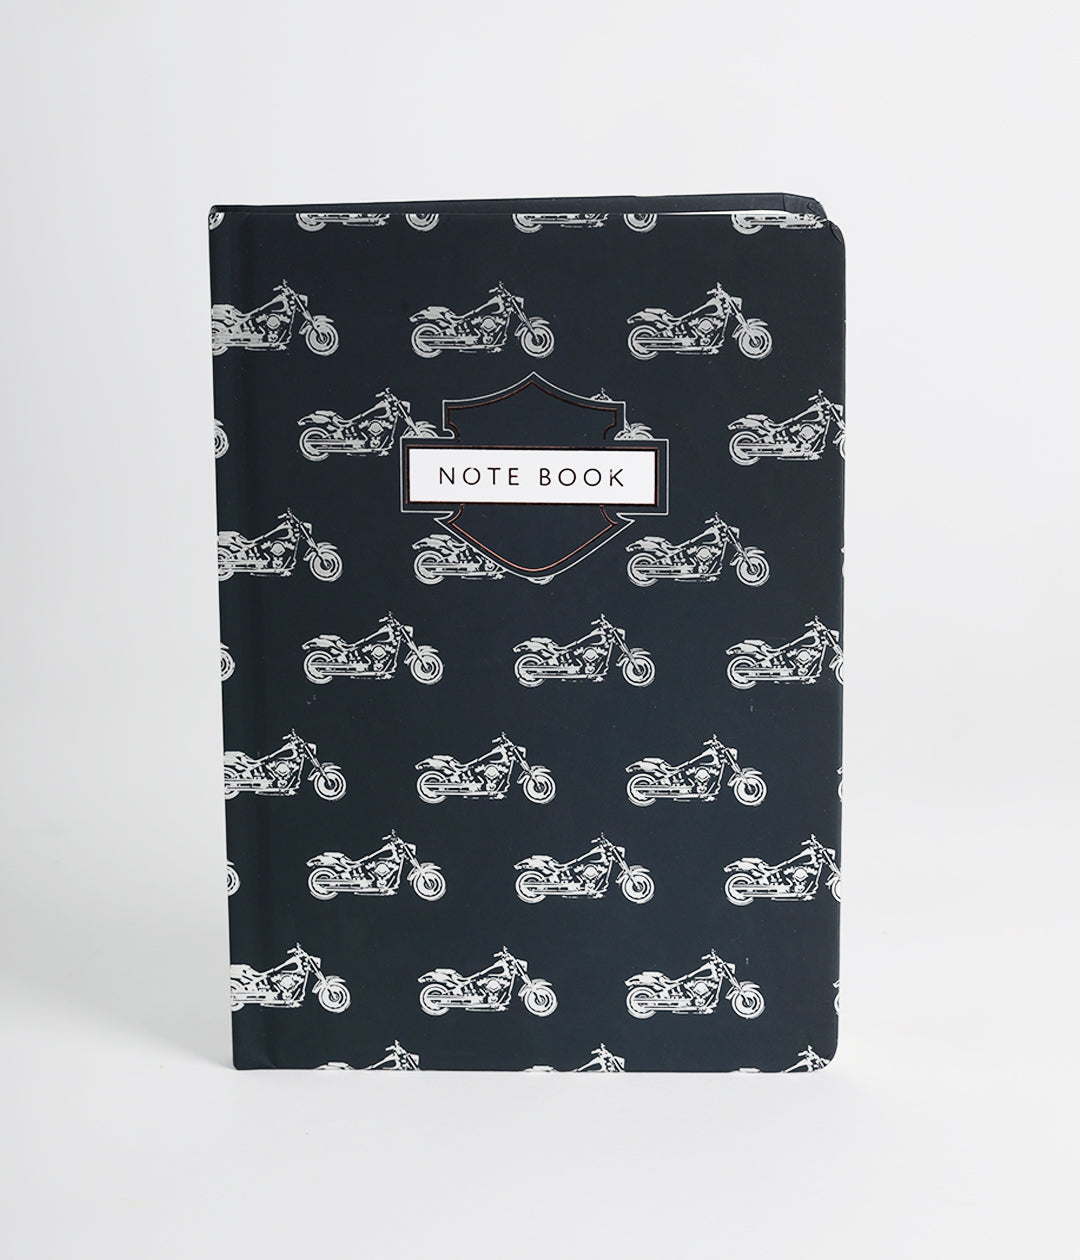 Miles To Go Hardbound Notebook Journal Diary with Silver Foil & Copper Foil Accents